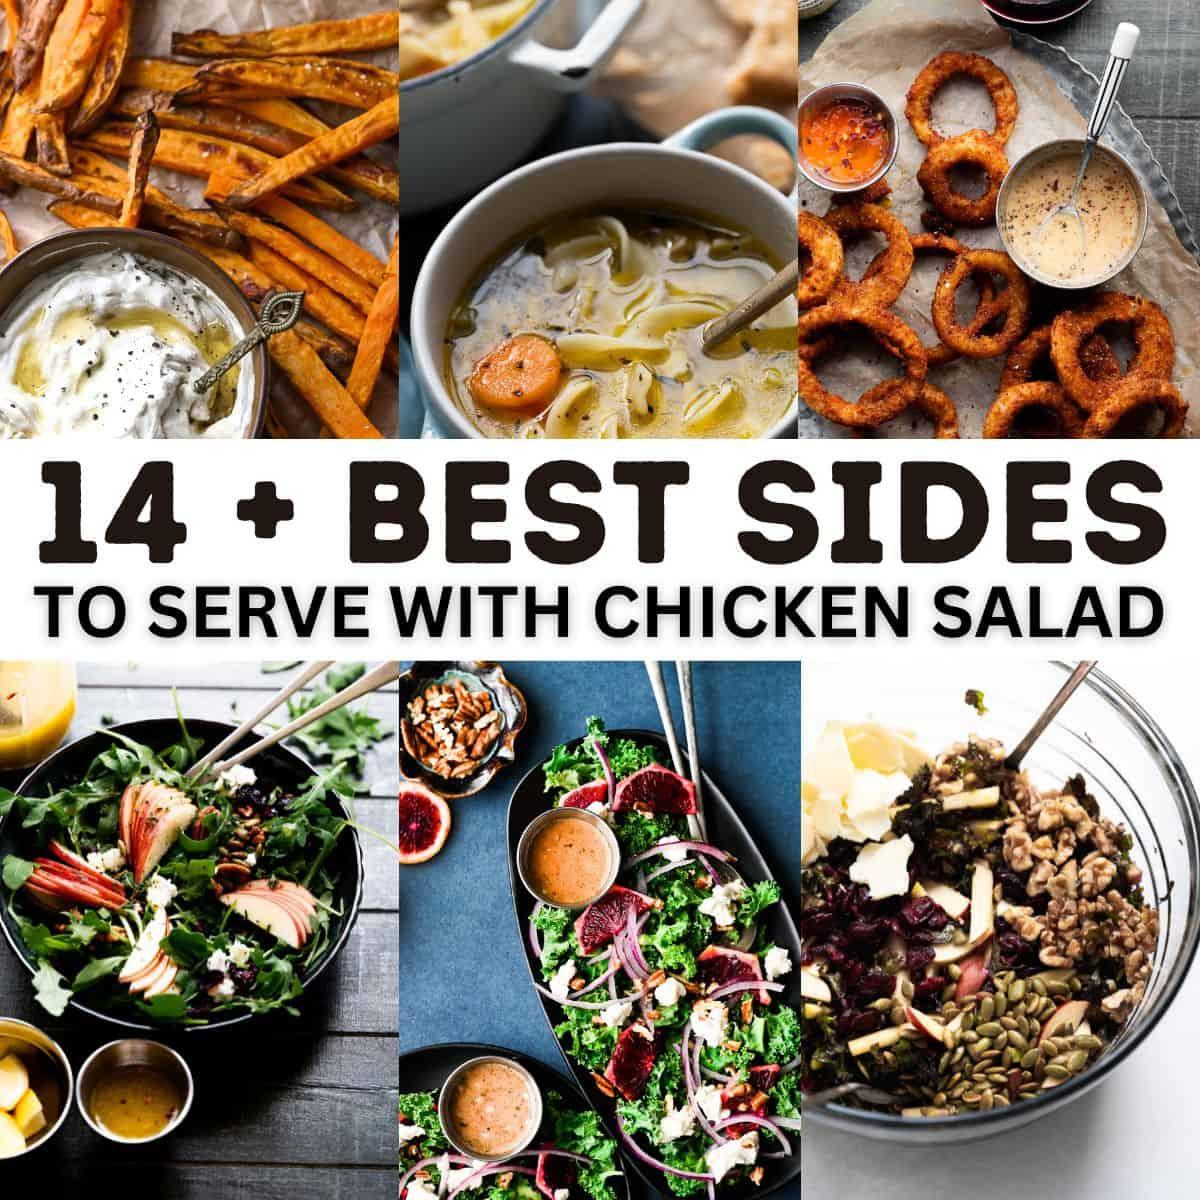 14 best sides to serve with chicken salad infographic and collage.